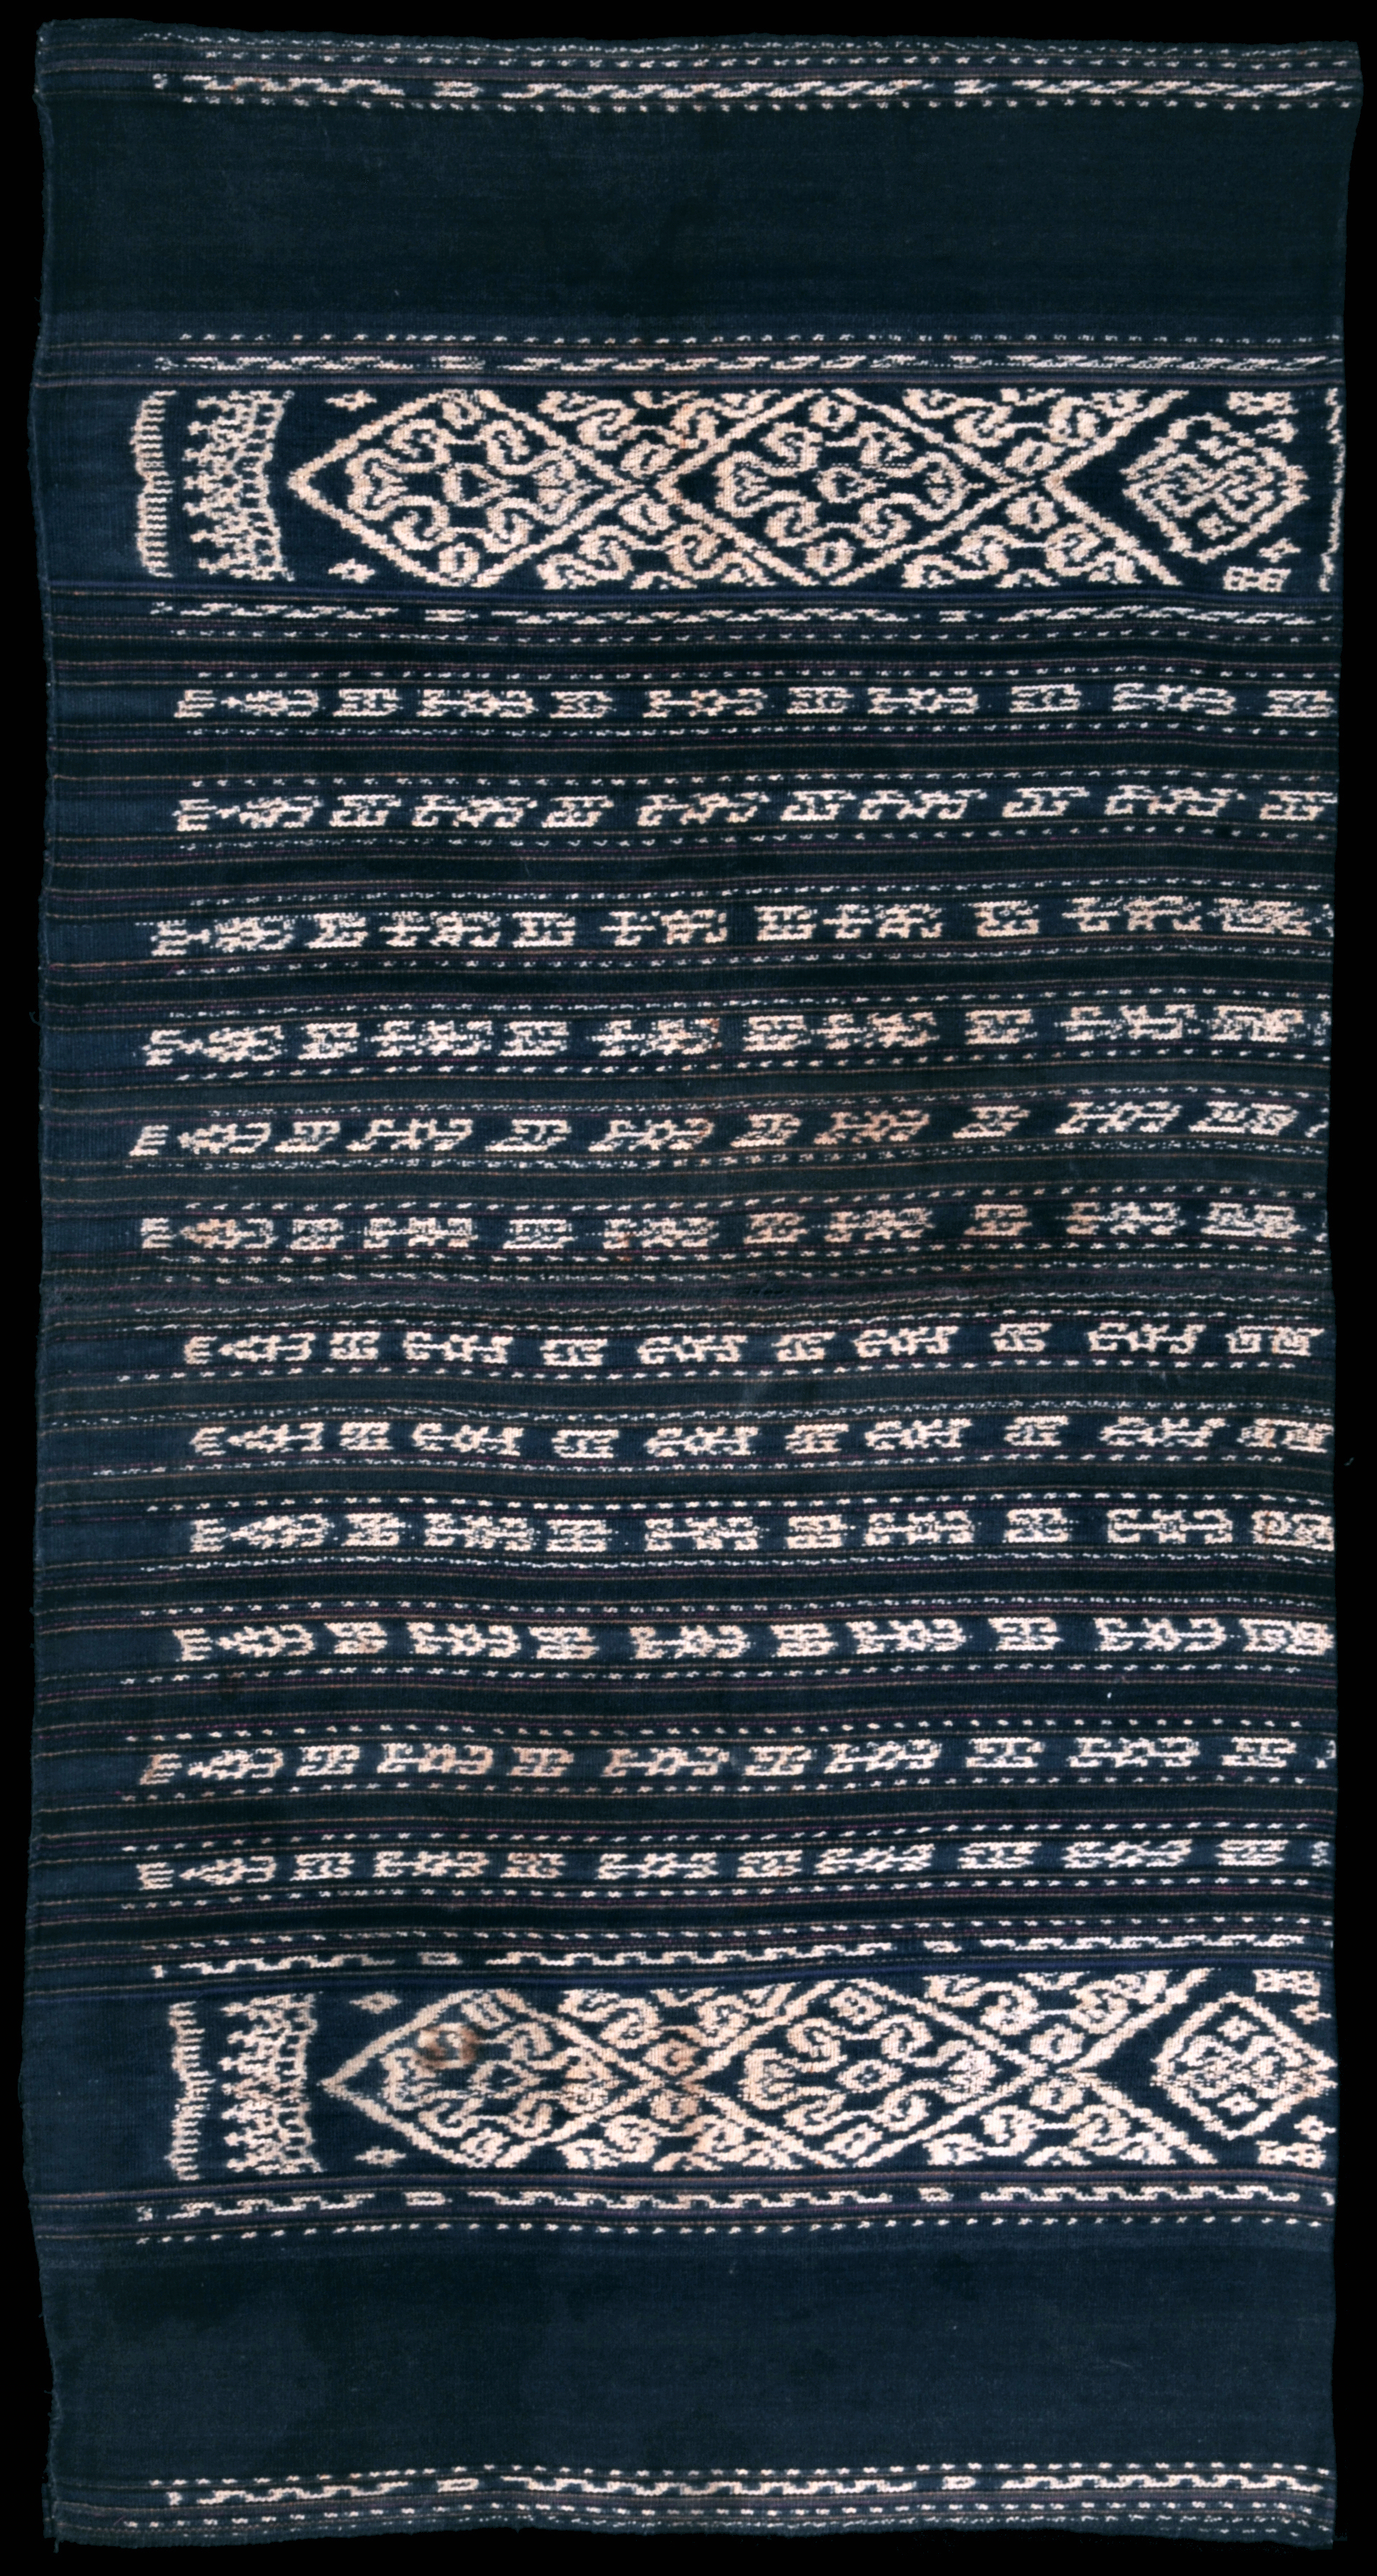 Ikat from Babar, Moluccas, Indonesia